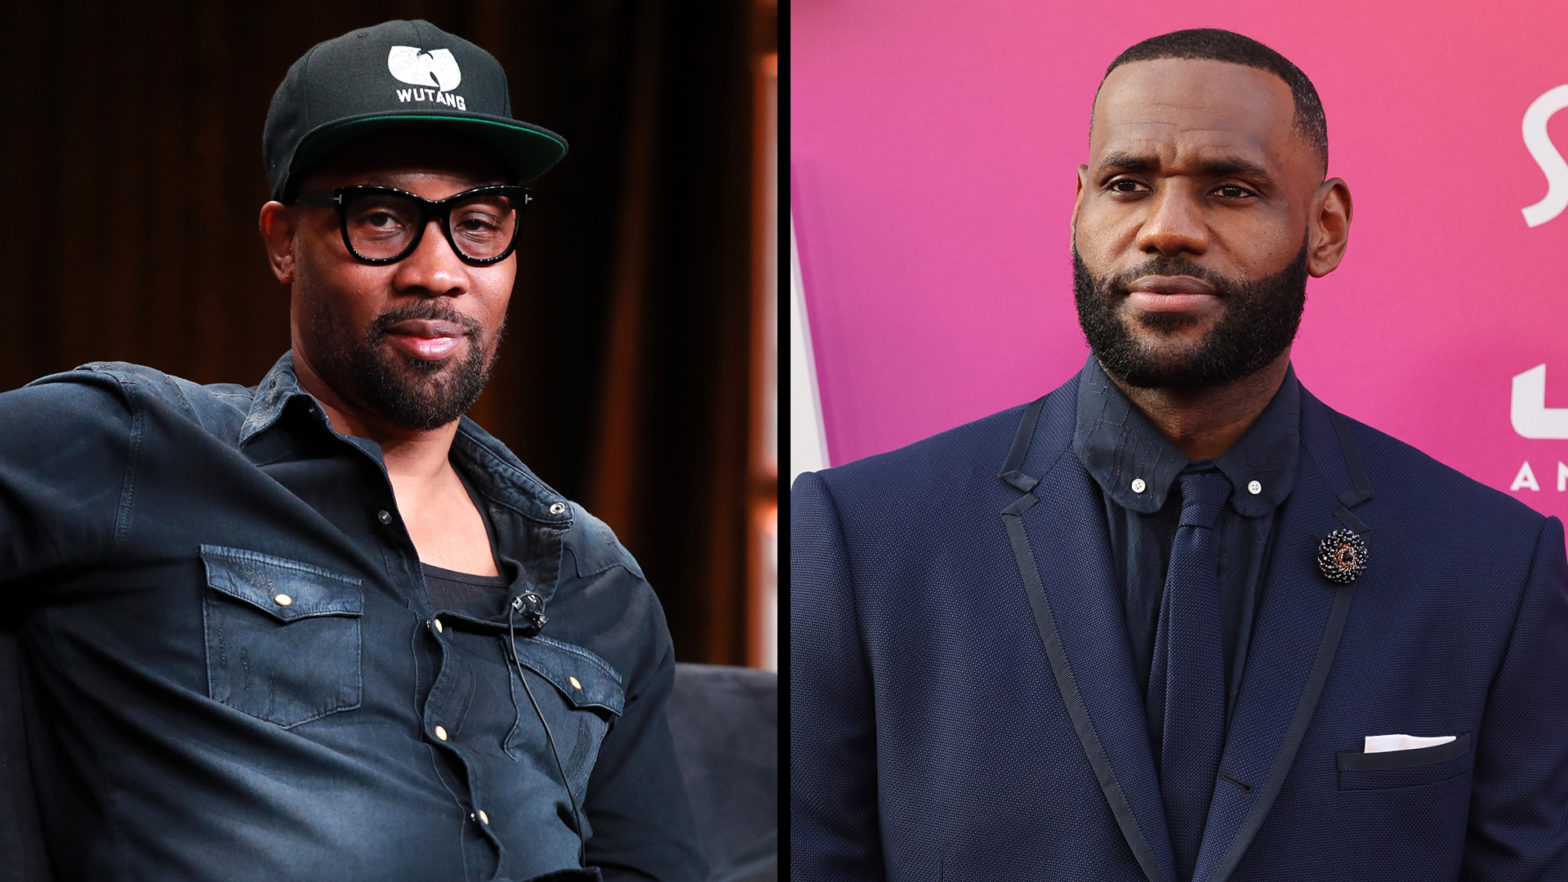 RZA Partners With The Calm App For 'King Of The Sleeping City' With Narration By LeBron James